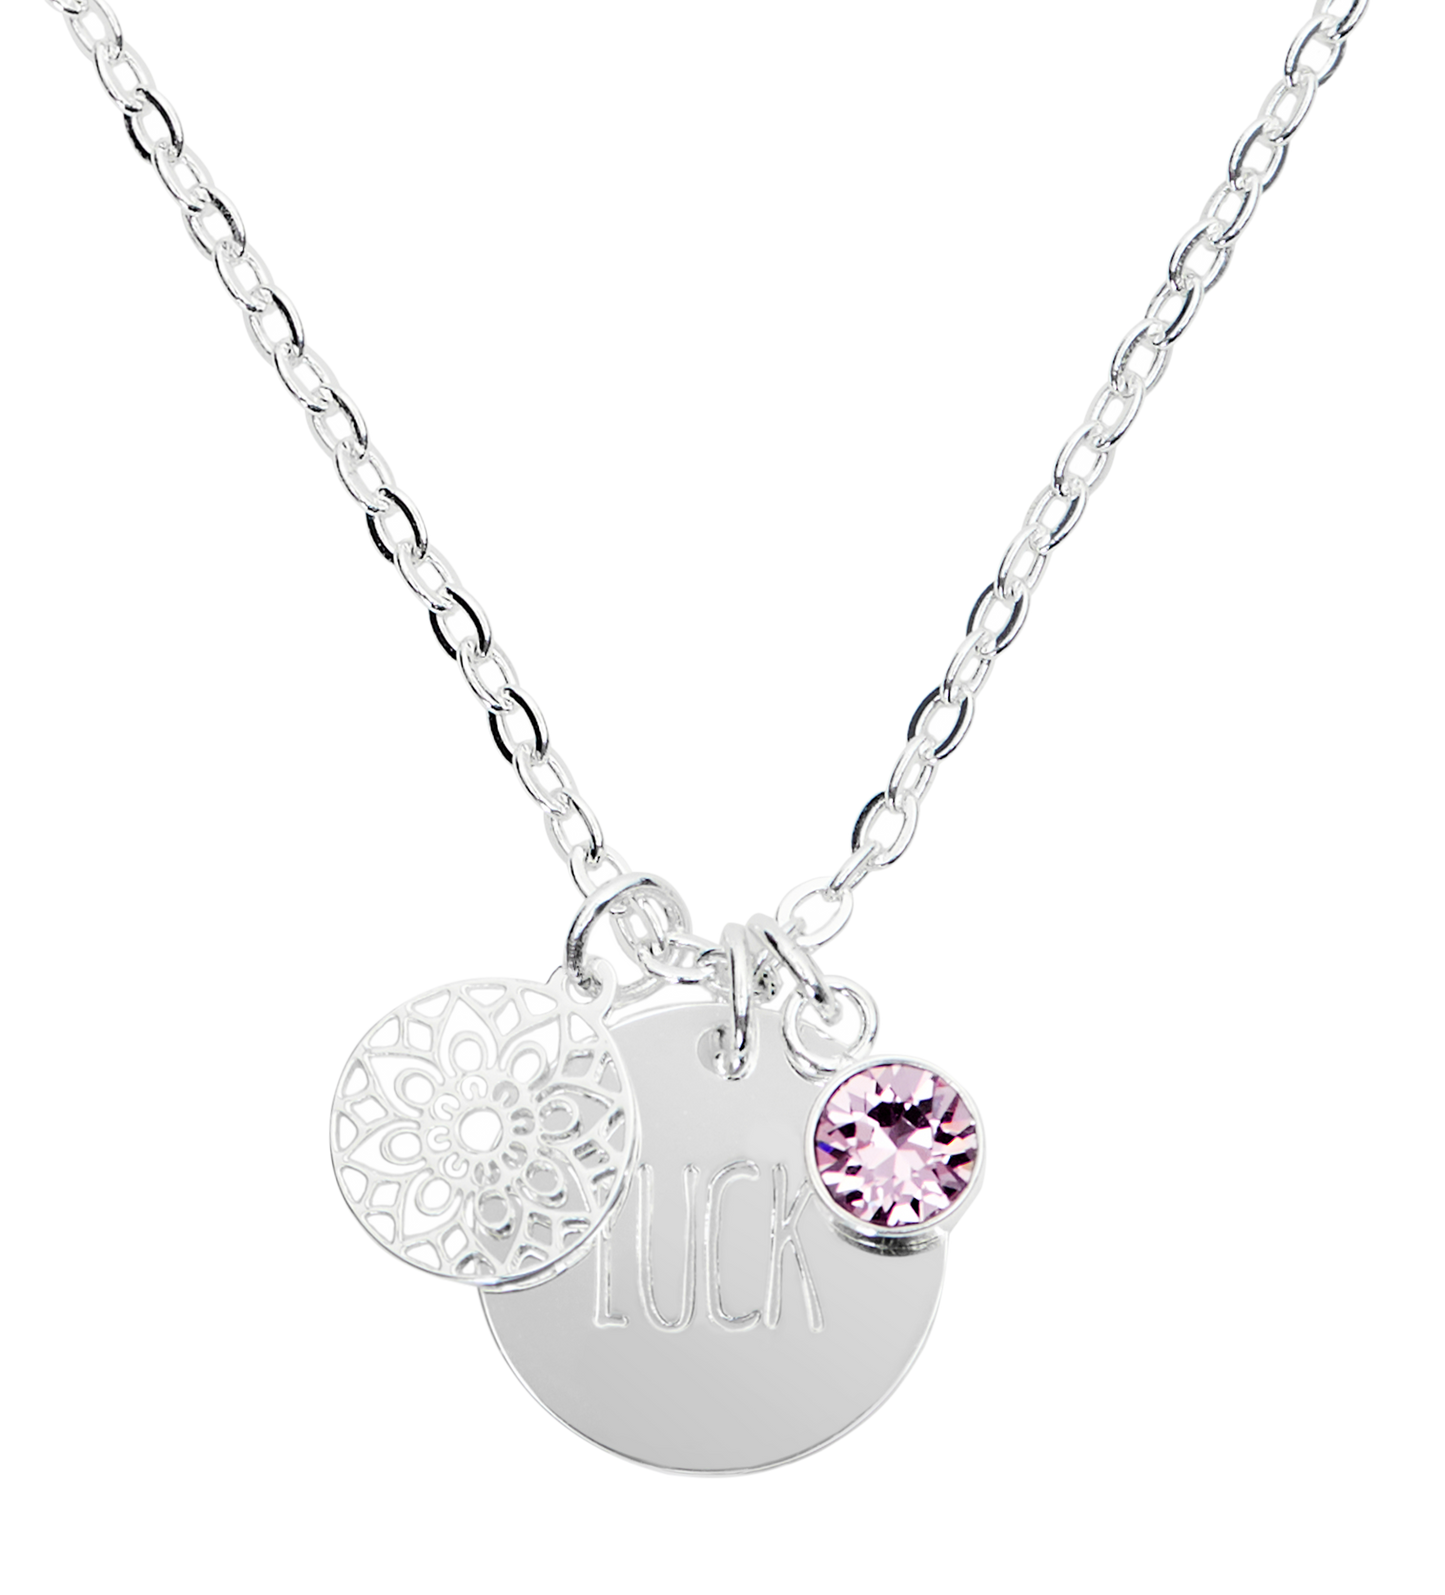 "Moments of life" silver plated necklace LUCK